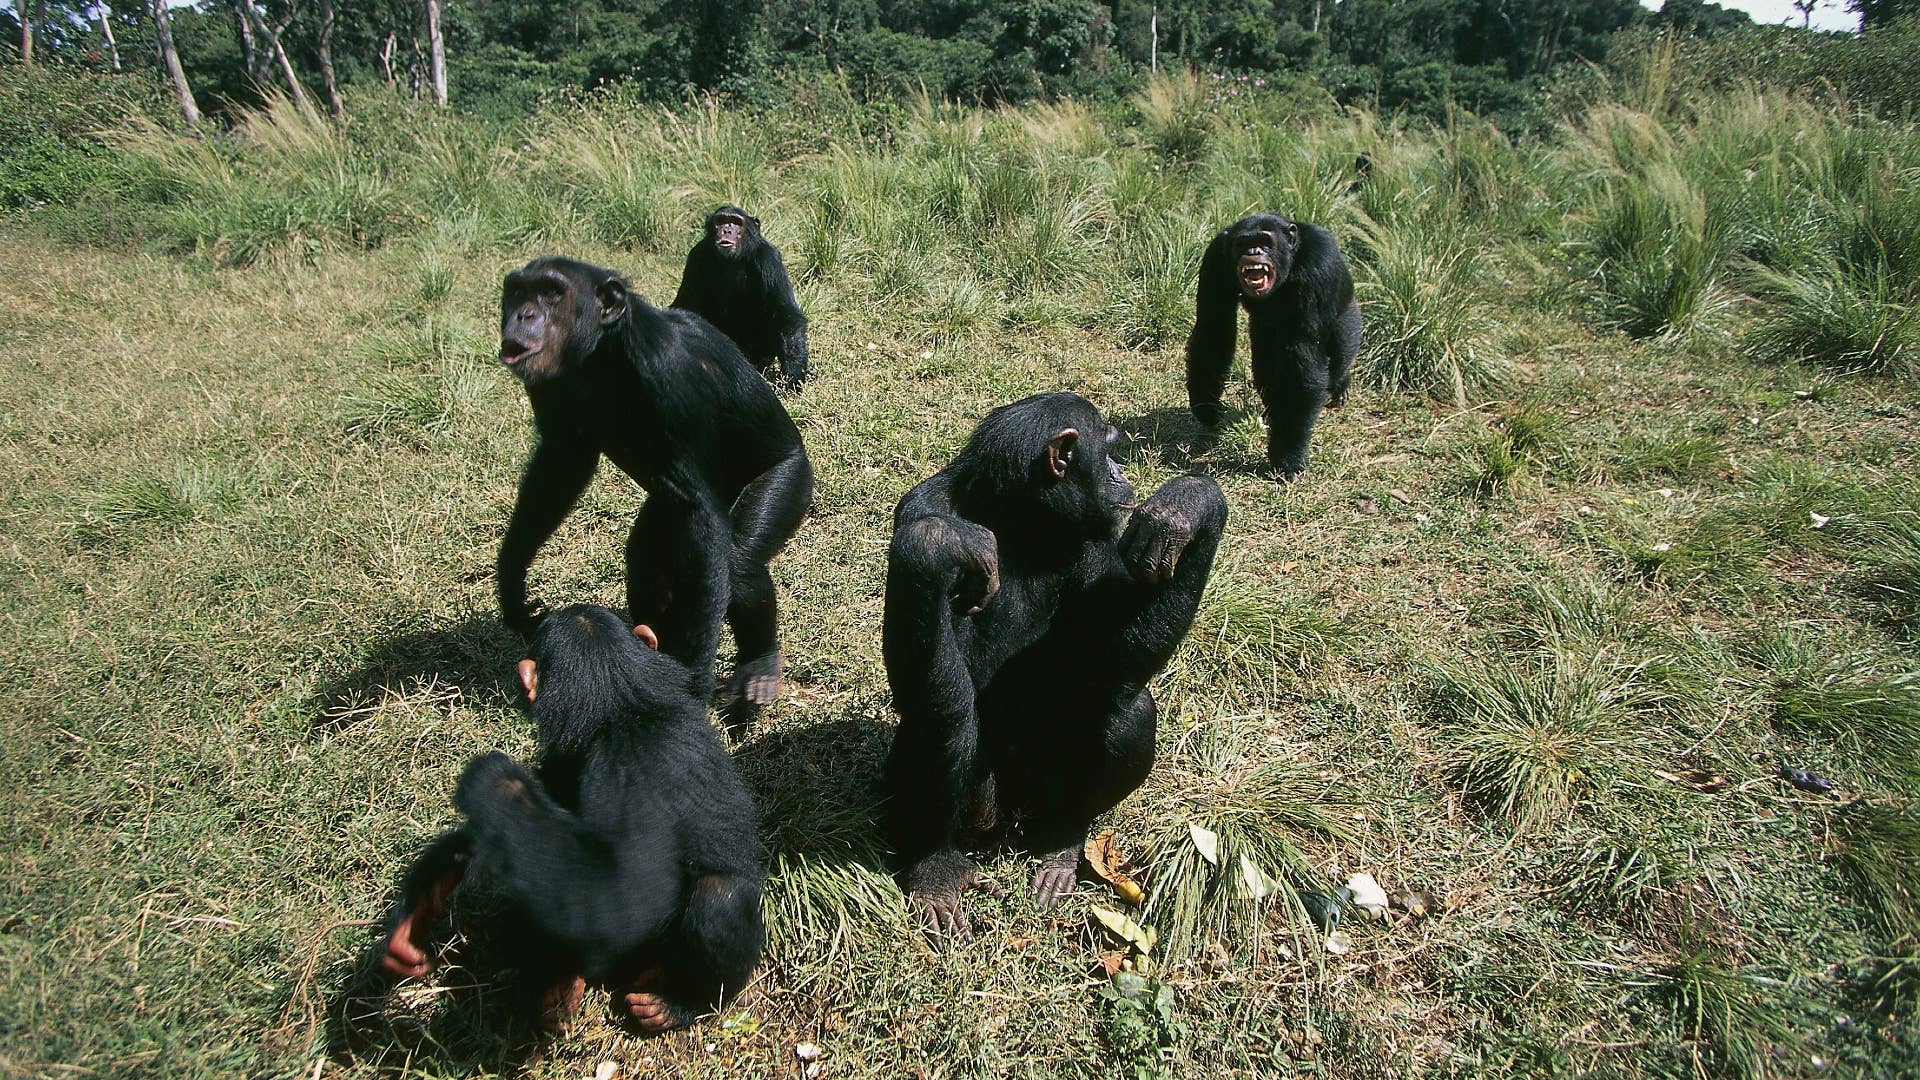 A group of wild chimps enjoy a sunny day outdoors.